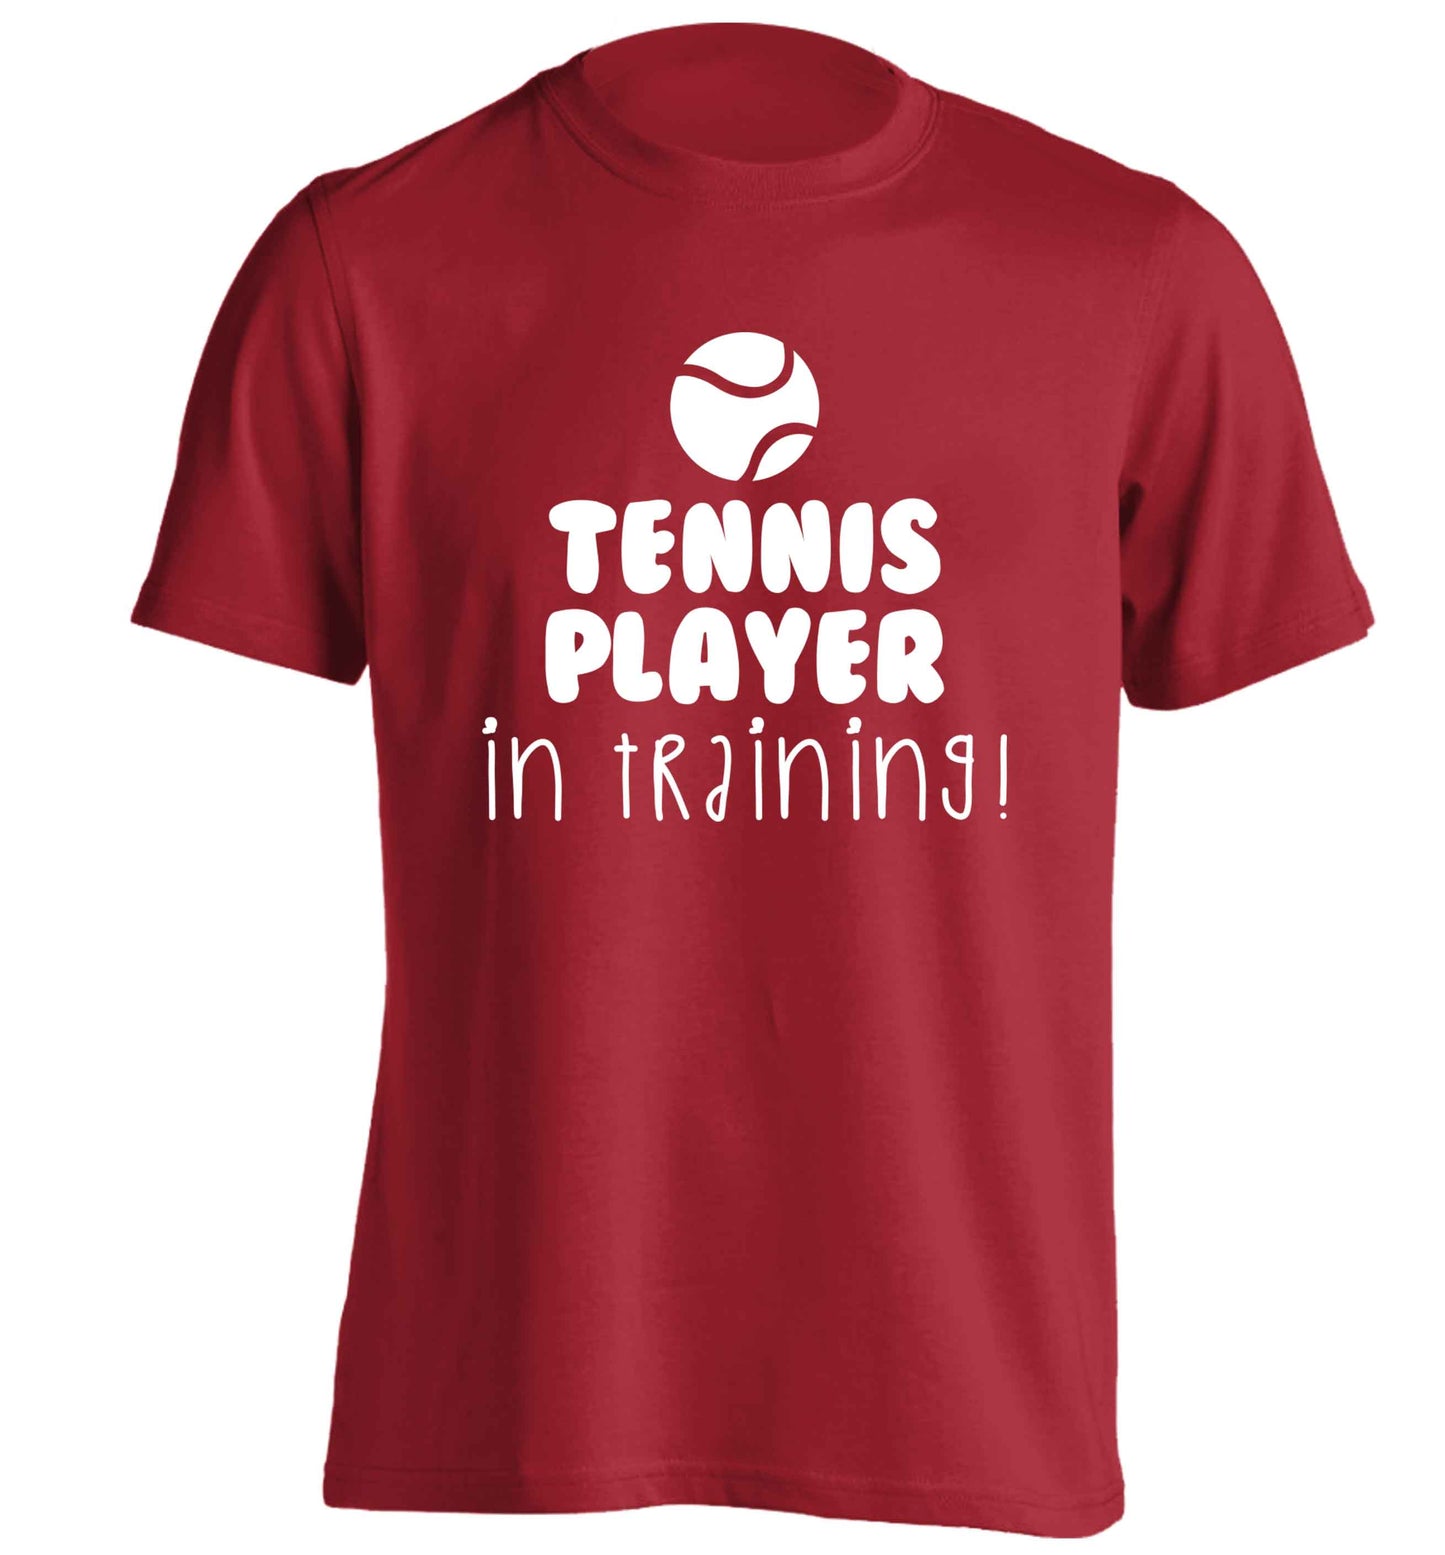 Tennis player in training adults unisex red Tshirt 2XL